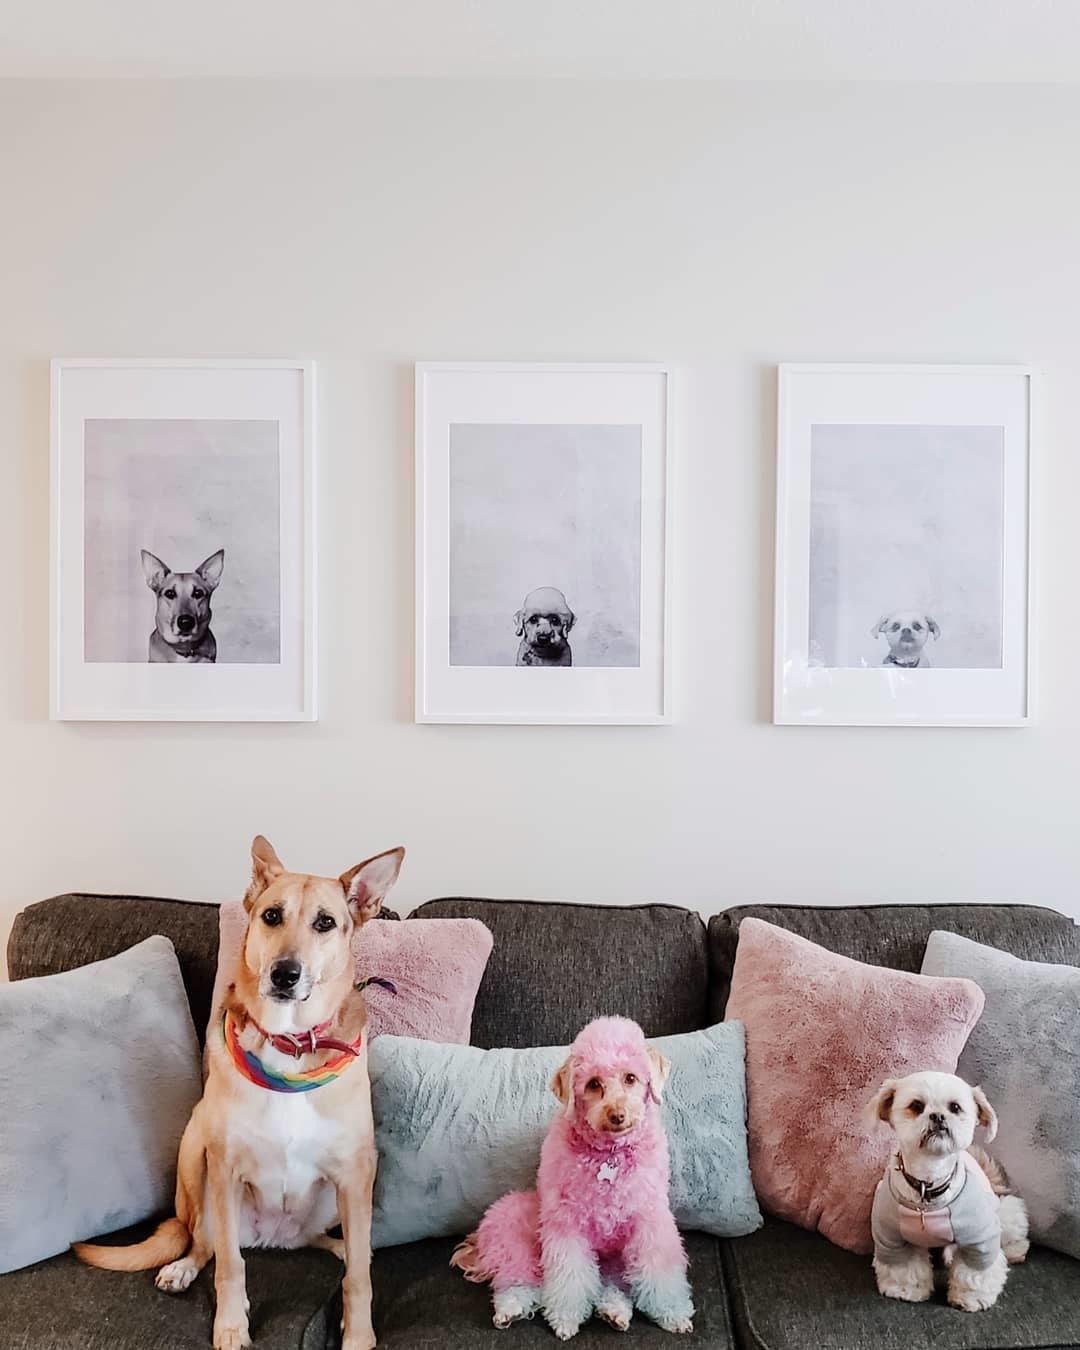 Gallery Wall of Framed Prints of Dogs